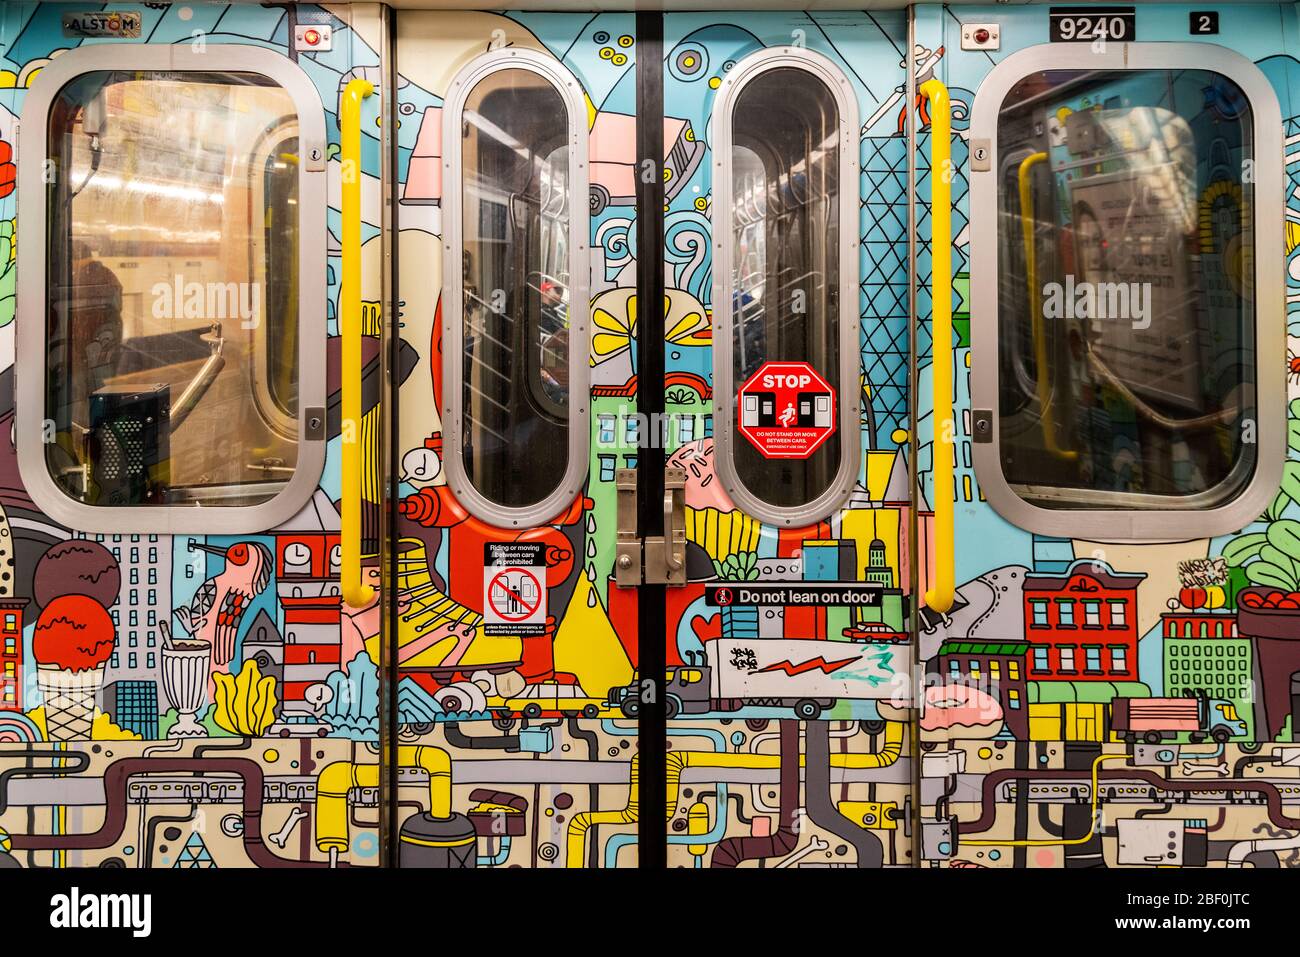 Interior of a subway train decorated with colorful mural art, New York, USA Stock Photo